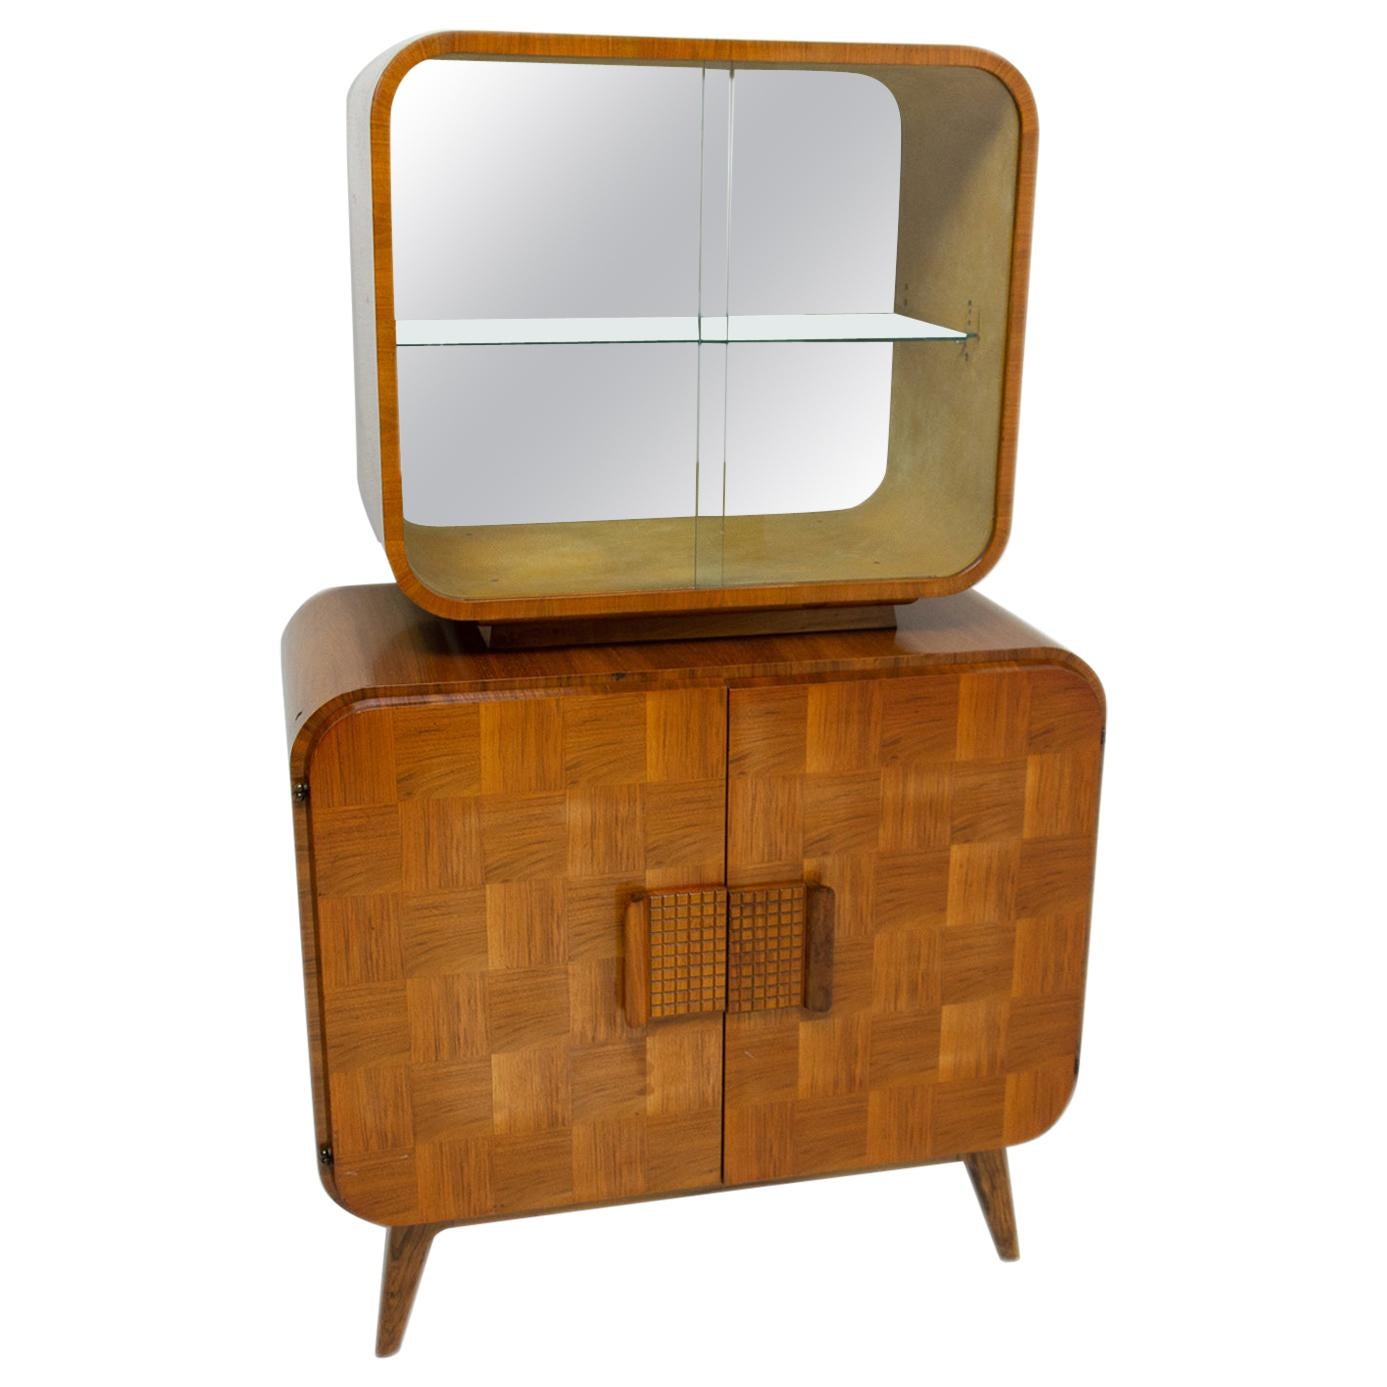 Midcentury Cataloque Display Case by Jindrich Halabala for Up Zavody, 1940s